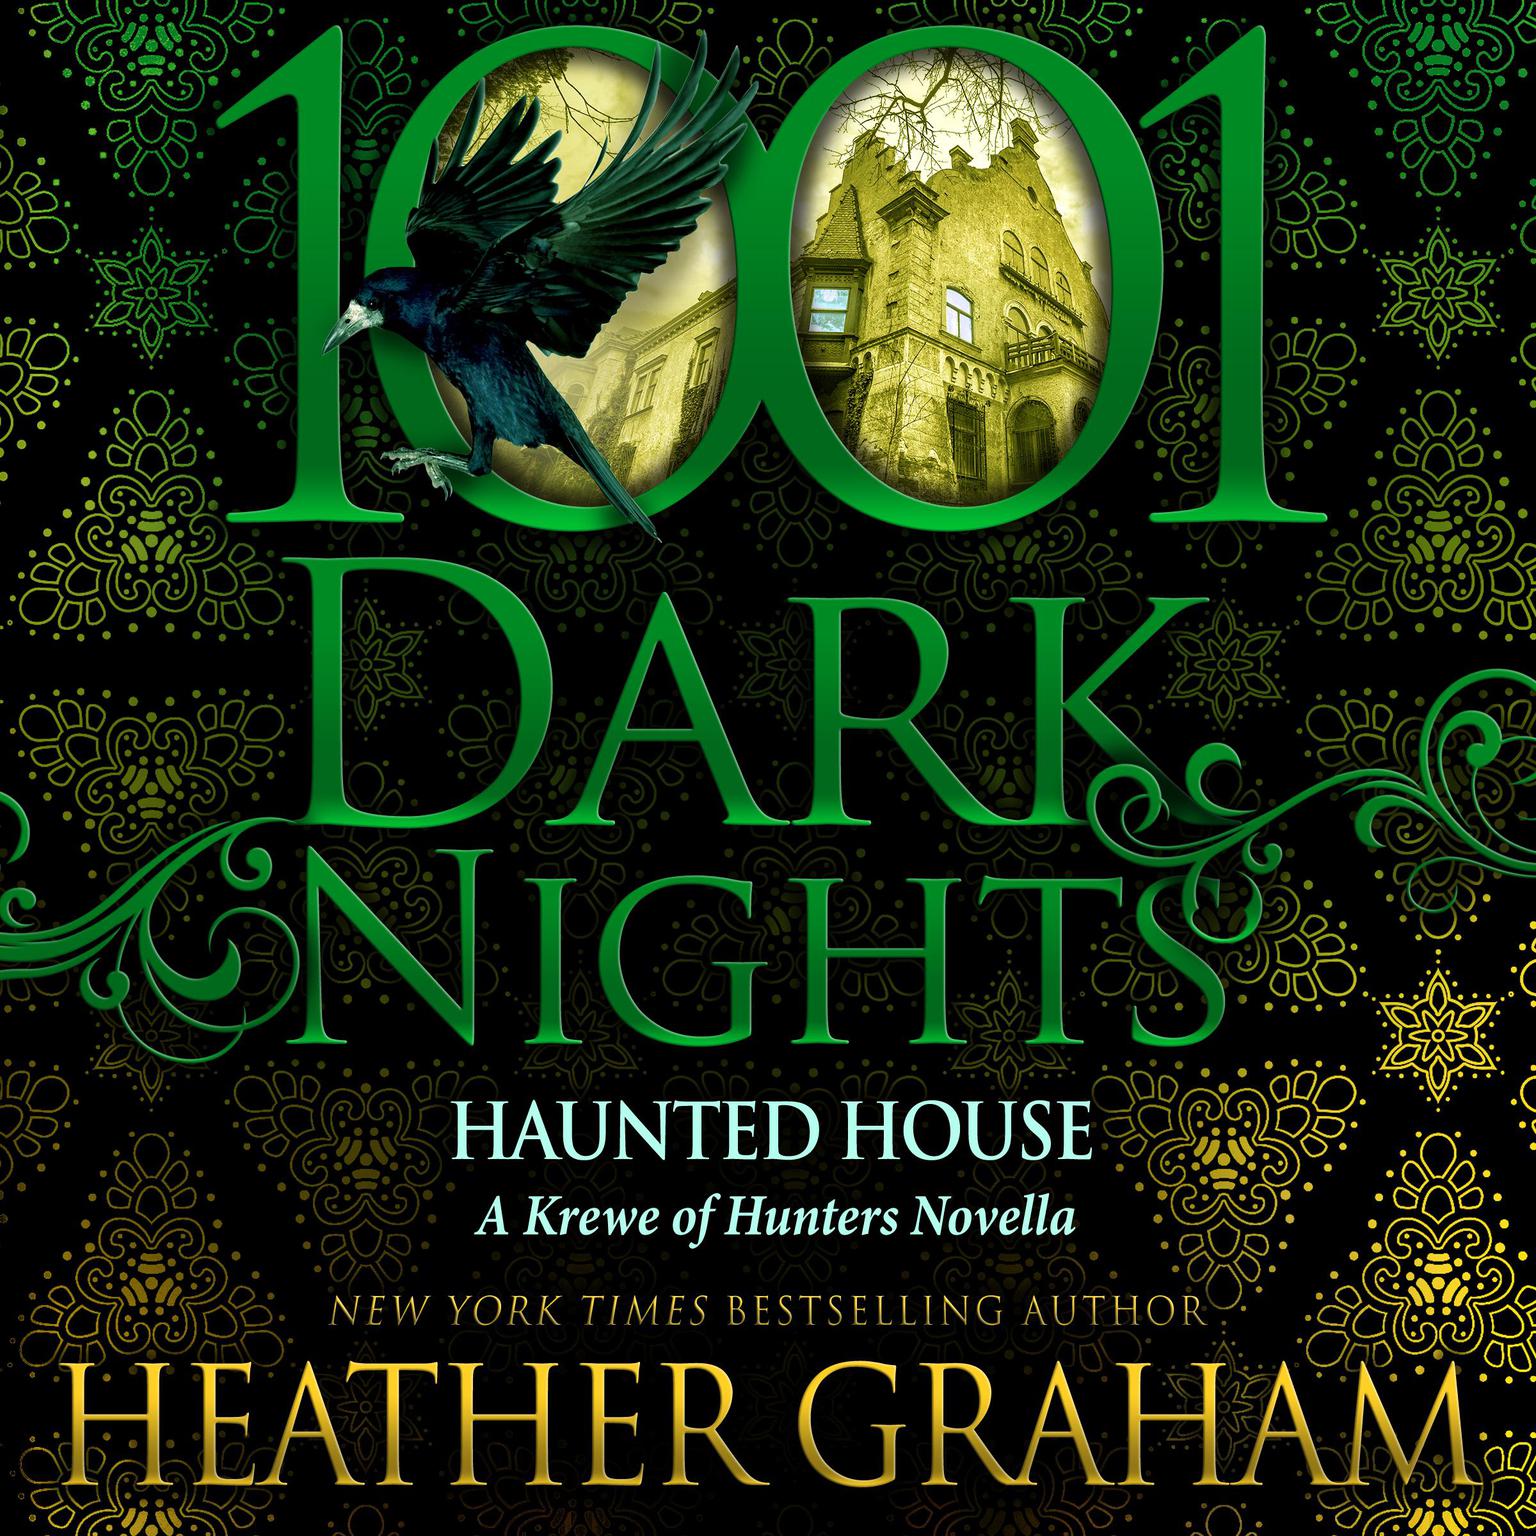 Haunted House: A Krewe of Hunters Novella Audiobook, by Heather Graham